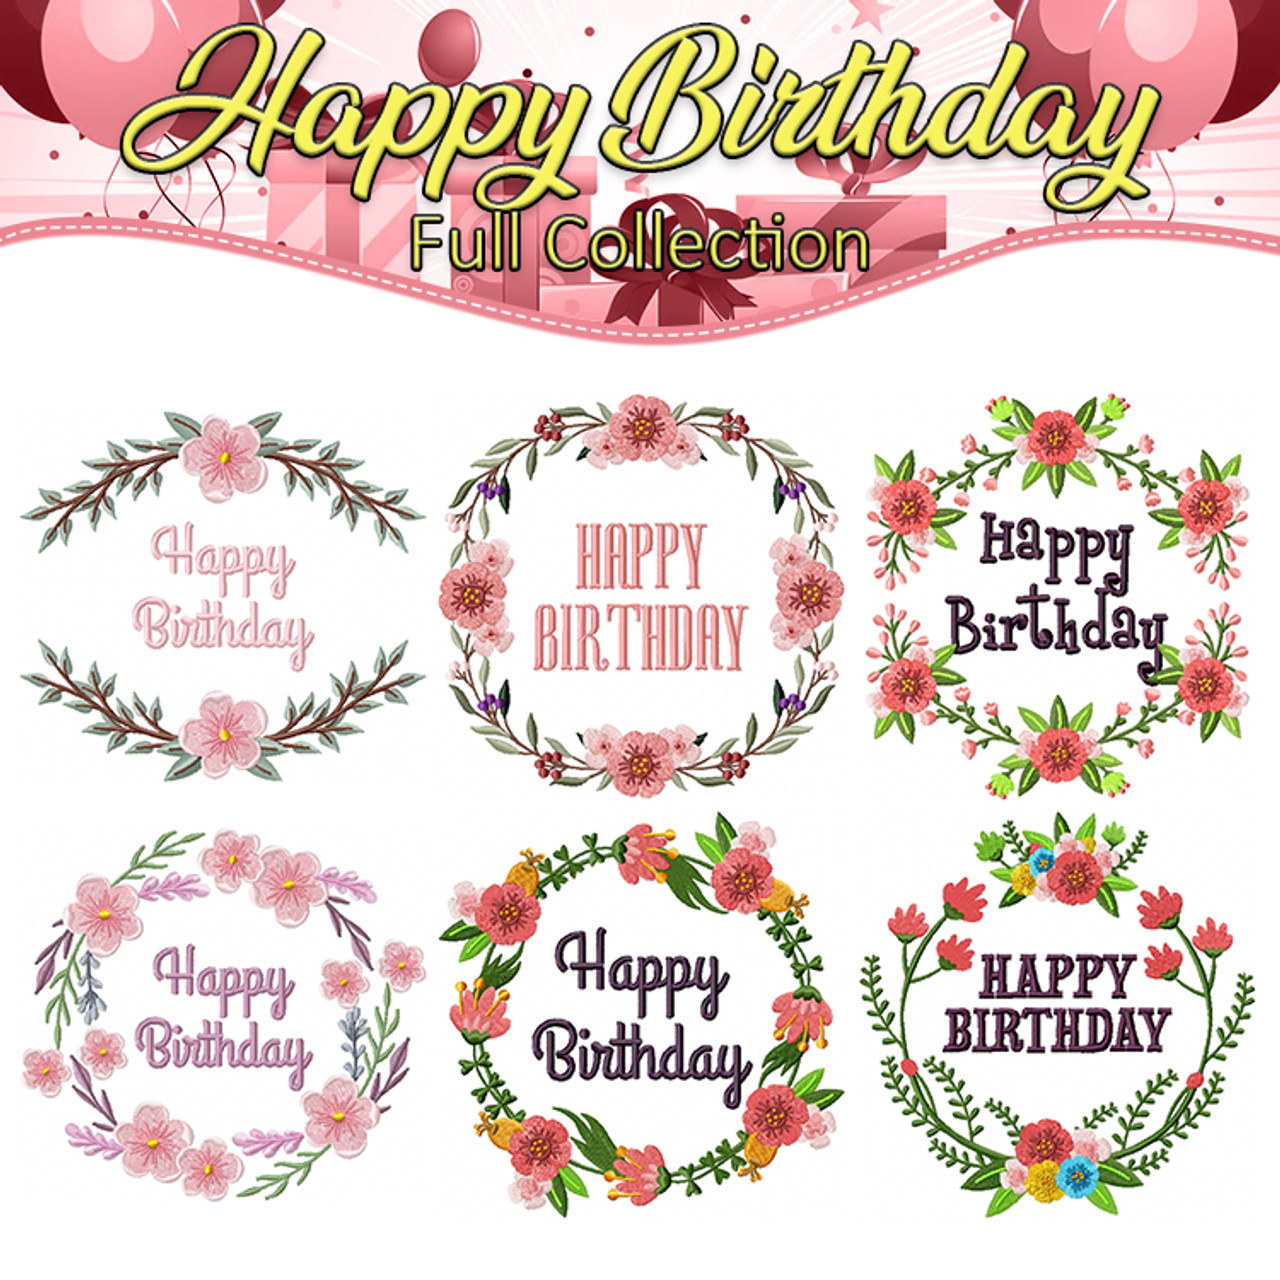 Machine Embroidery Design - Happy Birthday Collection of 6